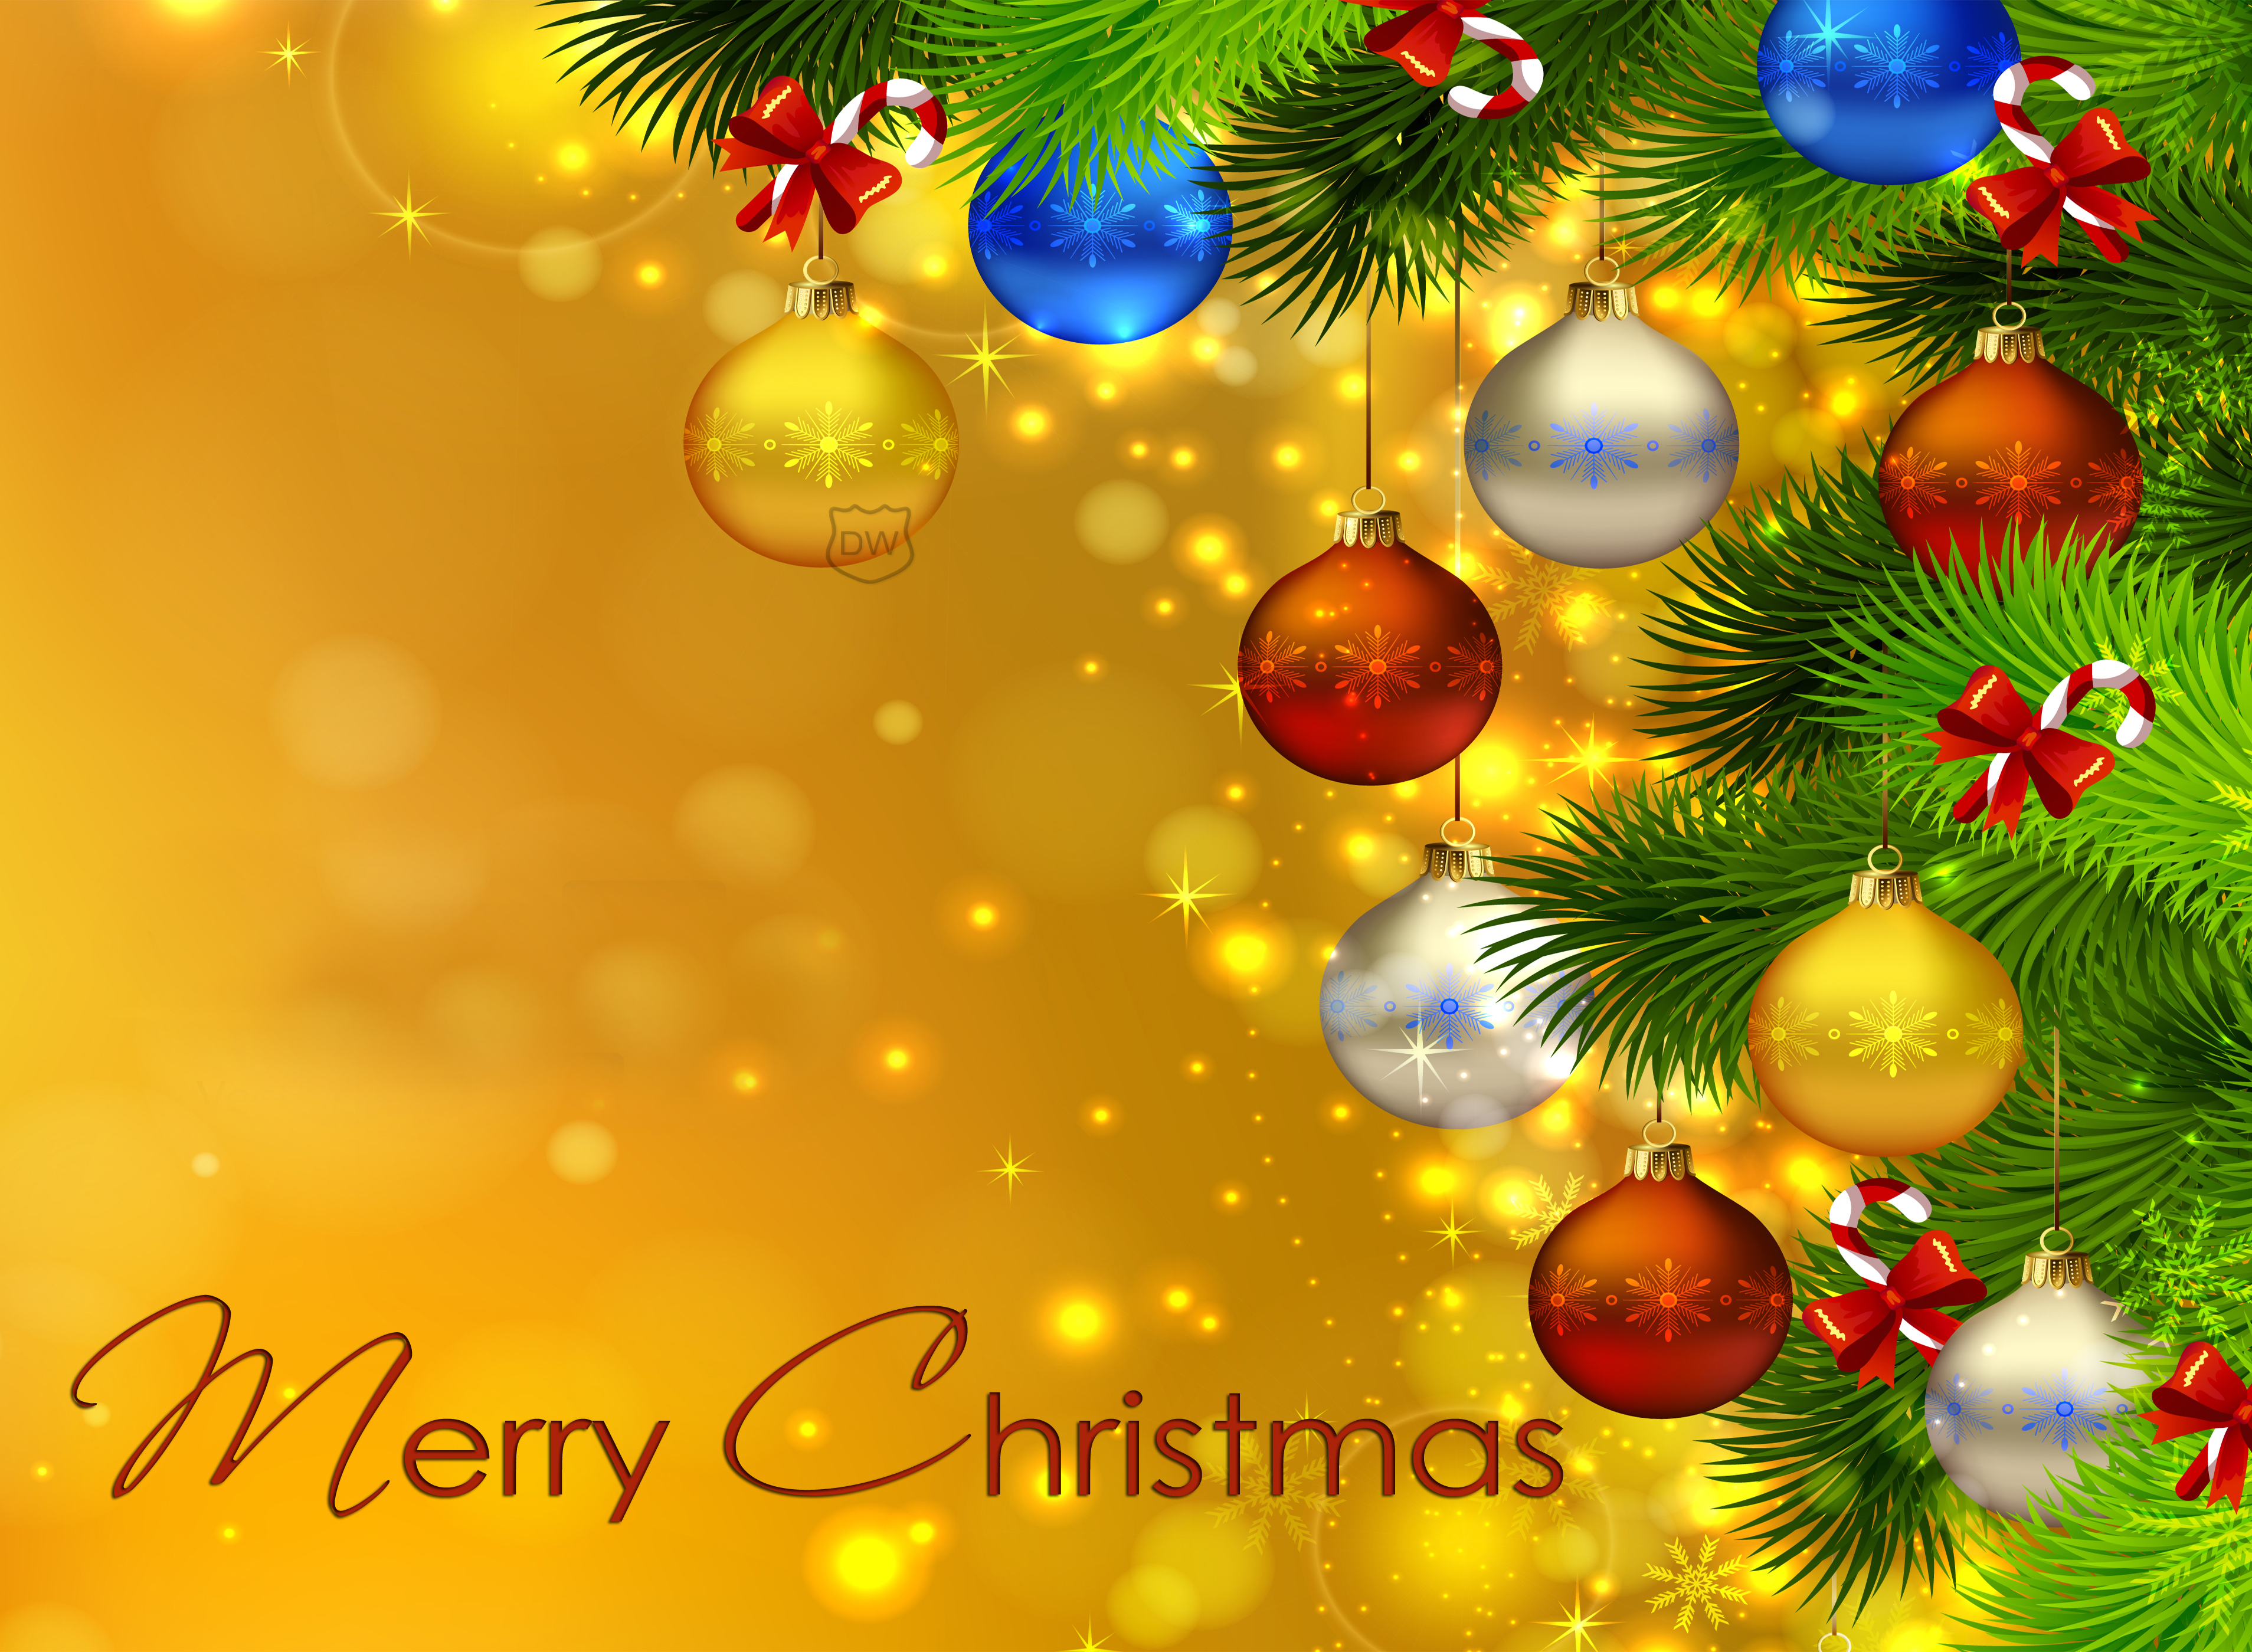 Free download HD Christmas Wallpaper [3816x2800] for your Desktop, Mobile & Tablet. Explore Free Holiday Background Image. Free Christmas Wallpaper, Christmas Desktop Free Holiday Wallpaper, Holiday Wallpaper and Background